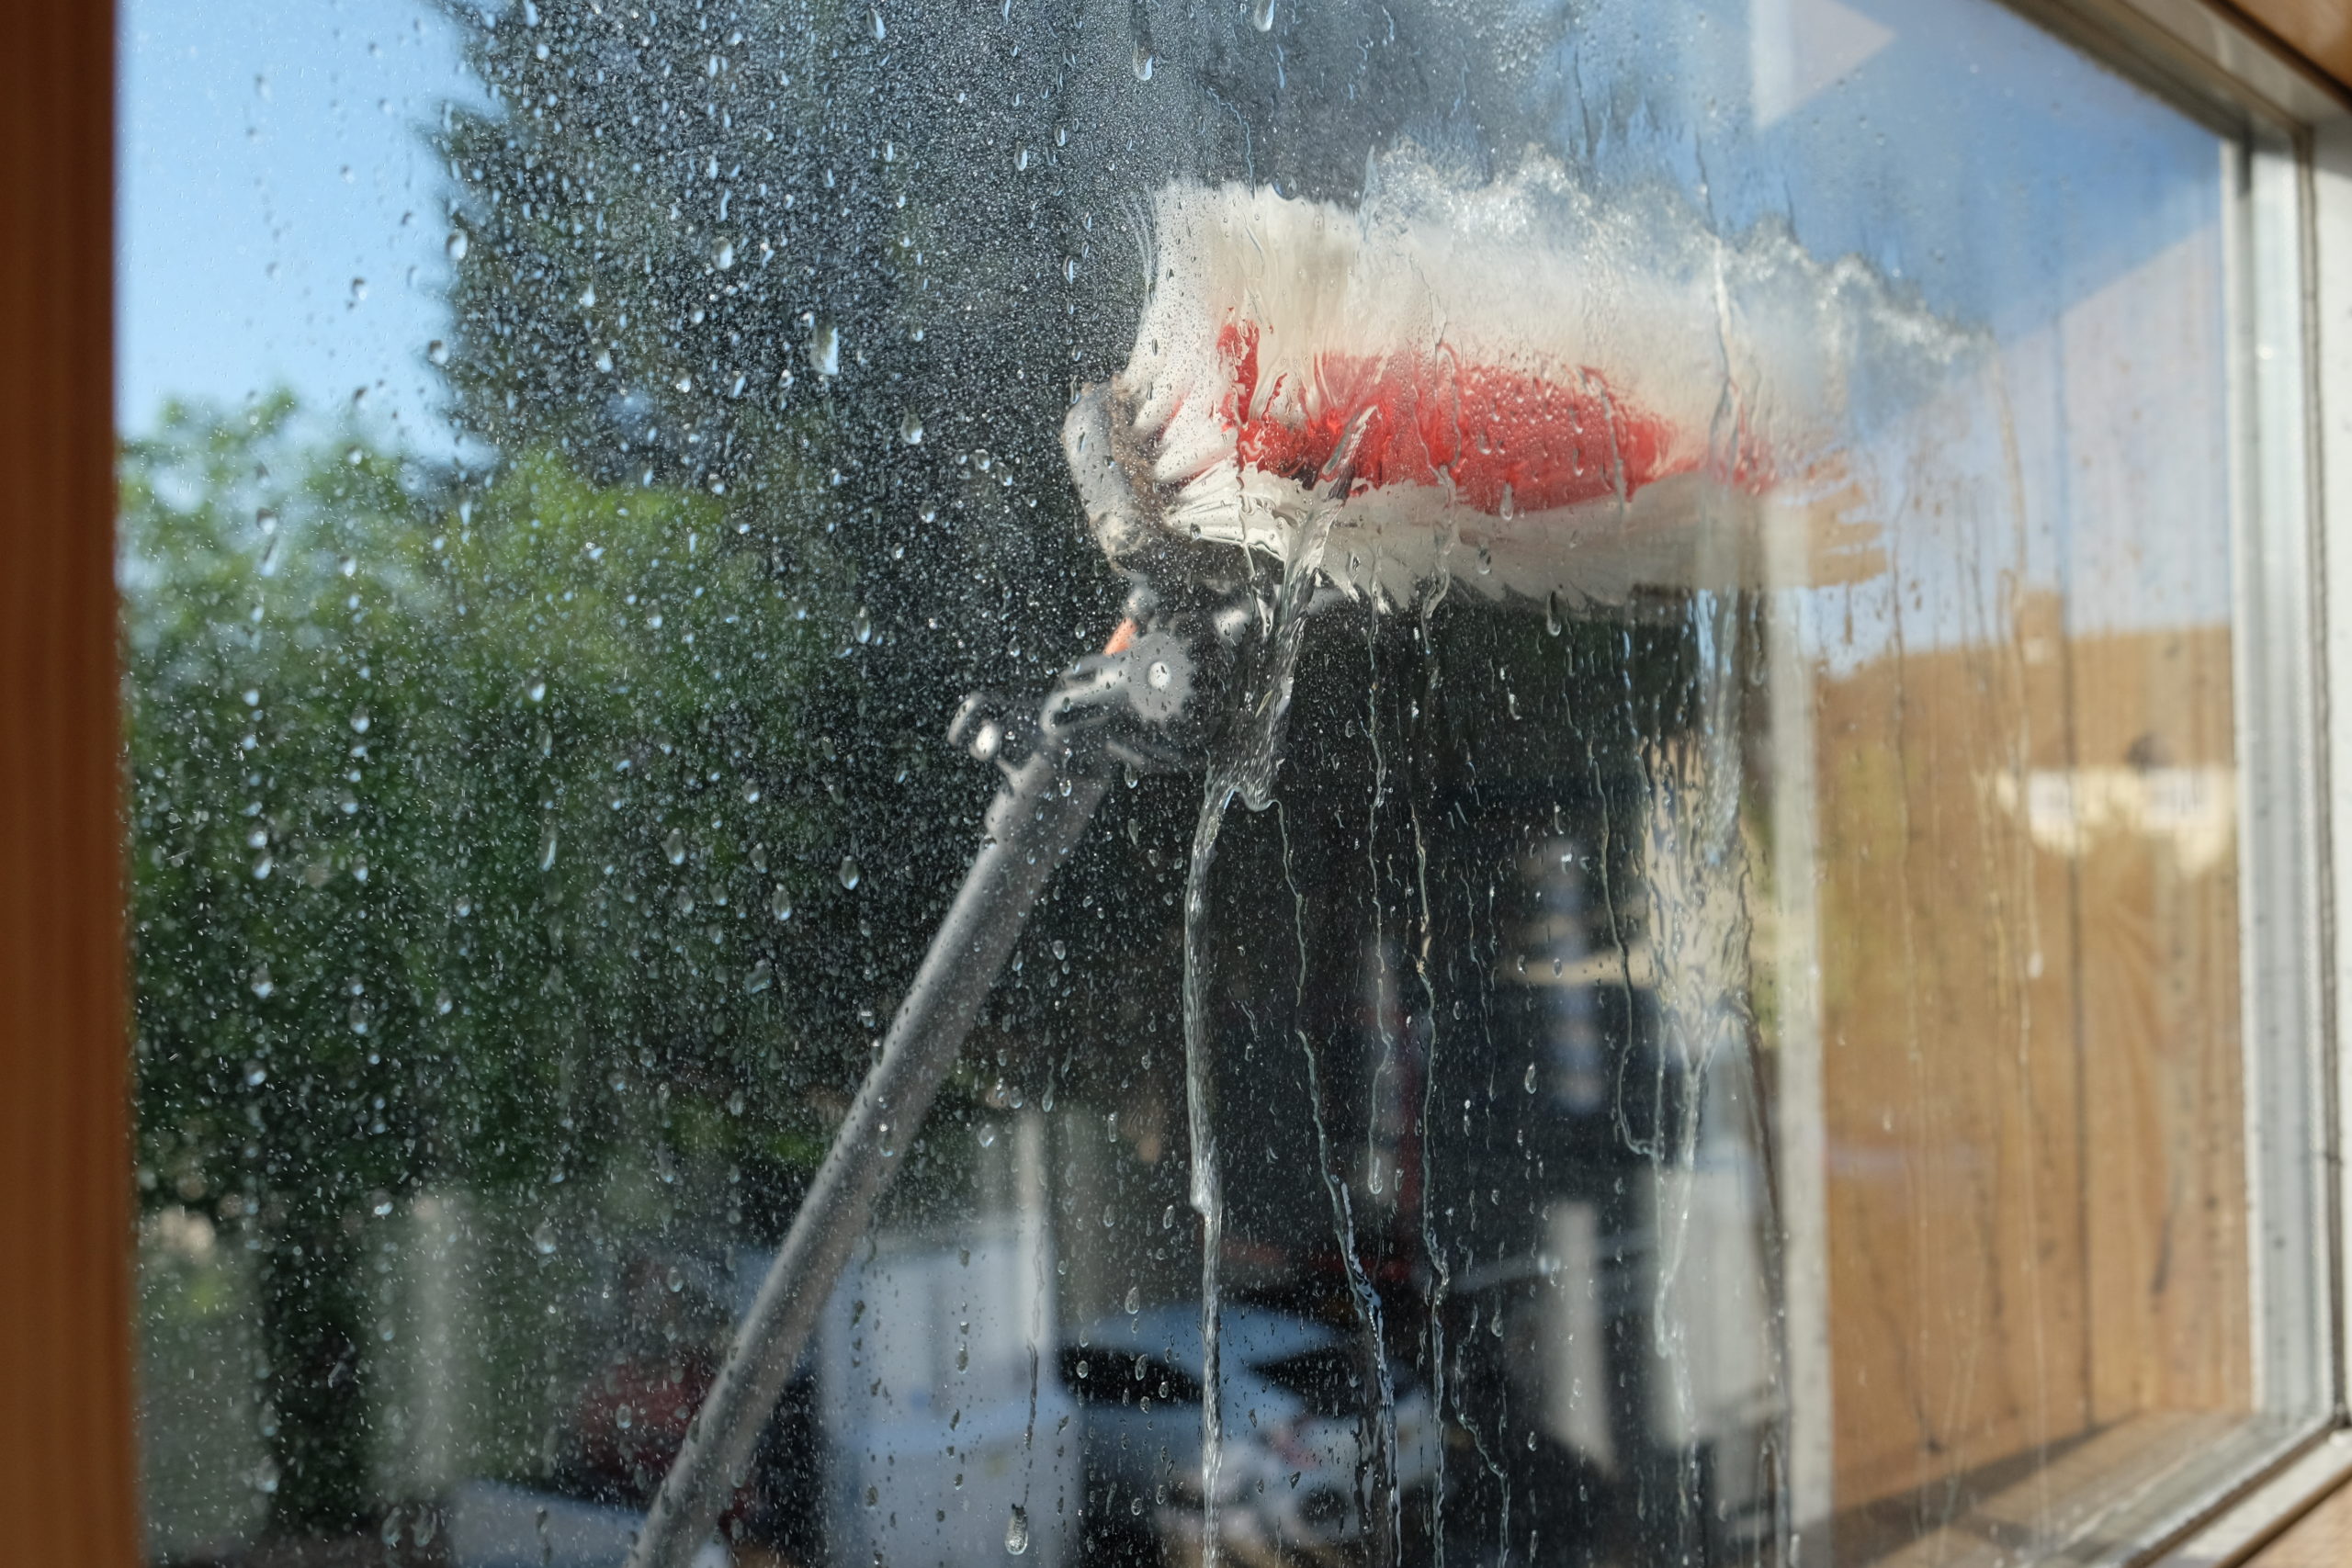 Reach and wash system on window